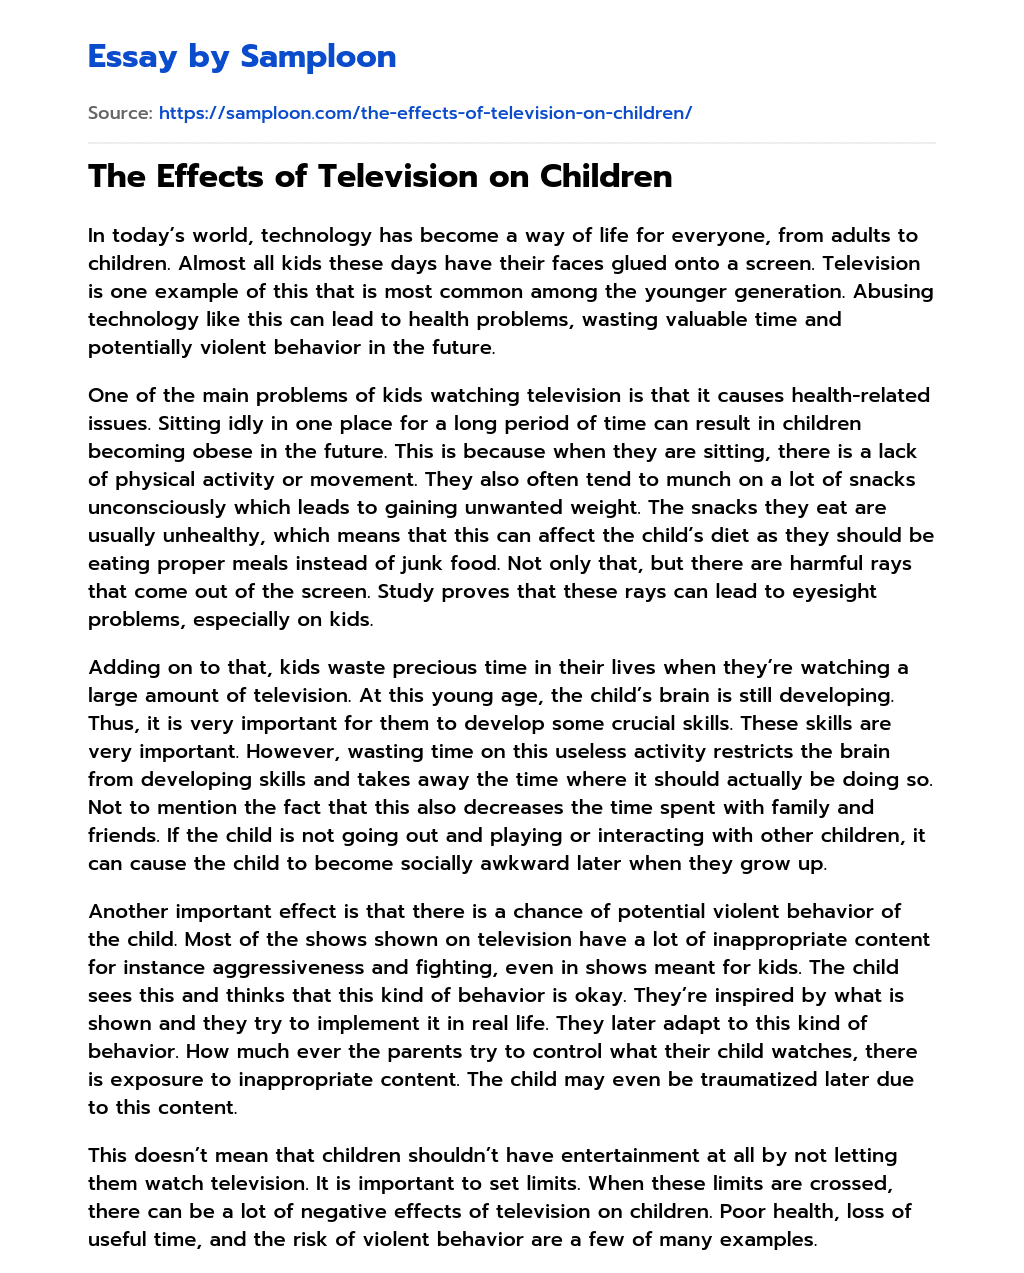 The Effects of Television on Children essay